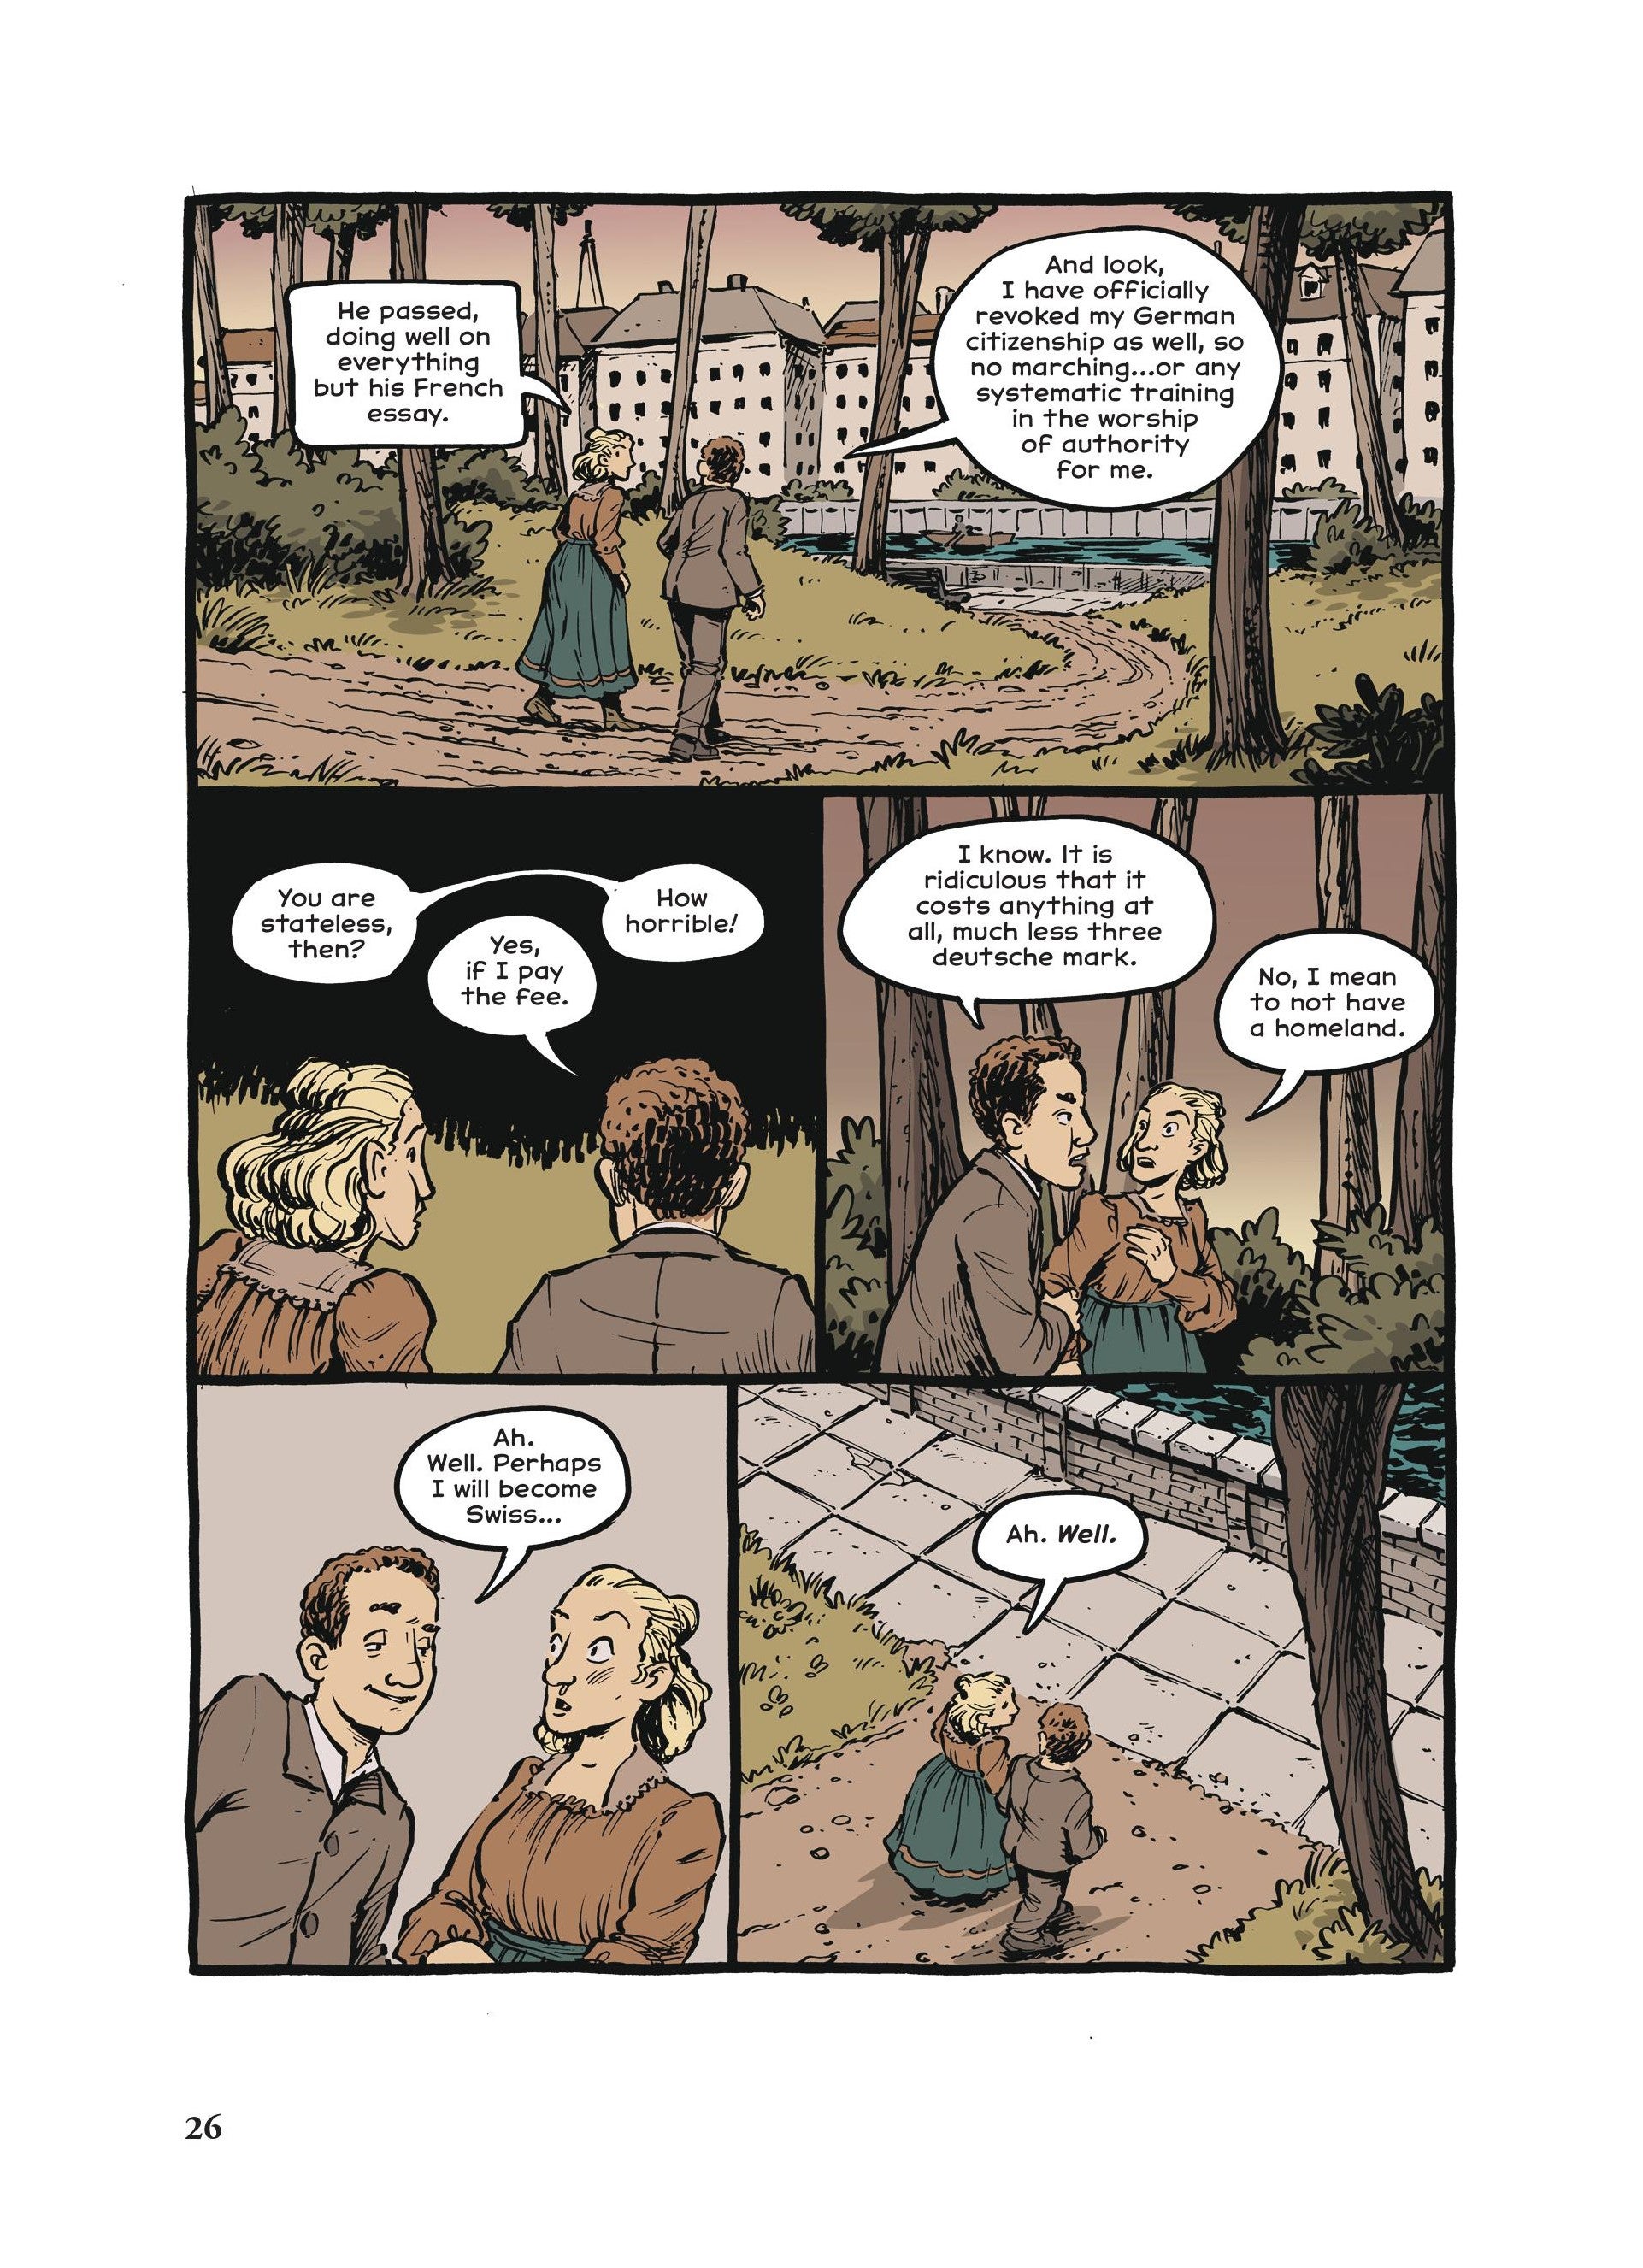 Comics page featuring Albert Einstein talking about his renouncing of Germany as a home country